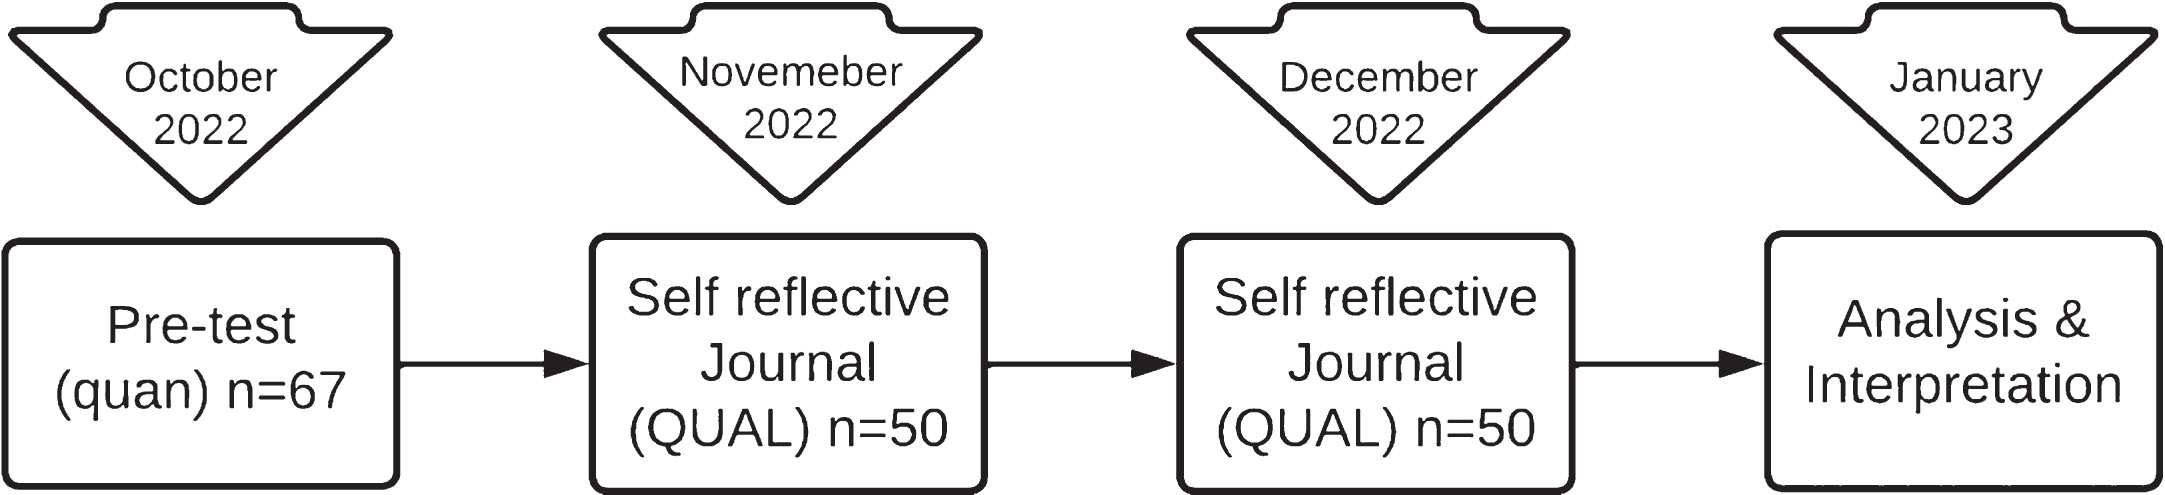 Sequential explorative research process (authors’ own illustration).